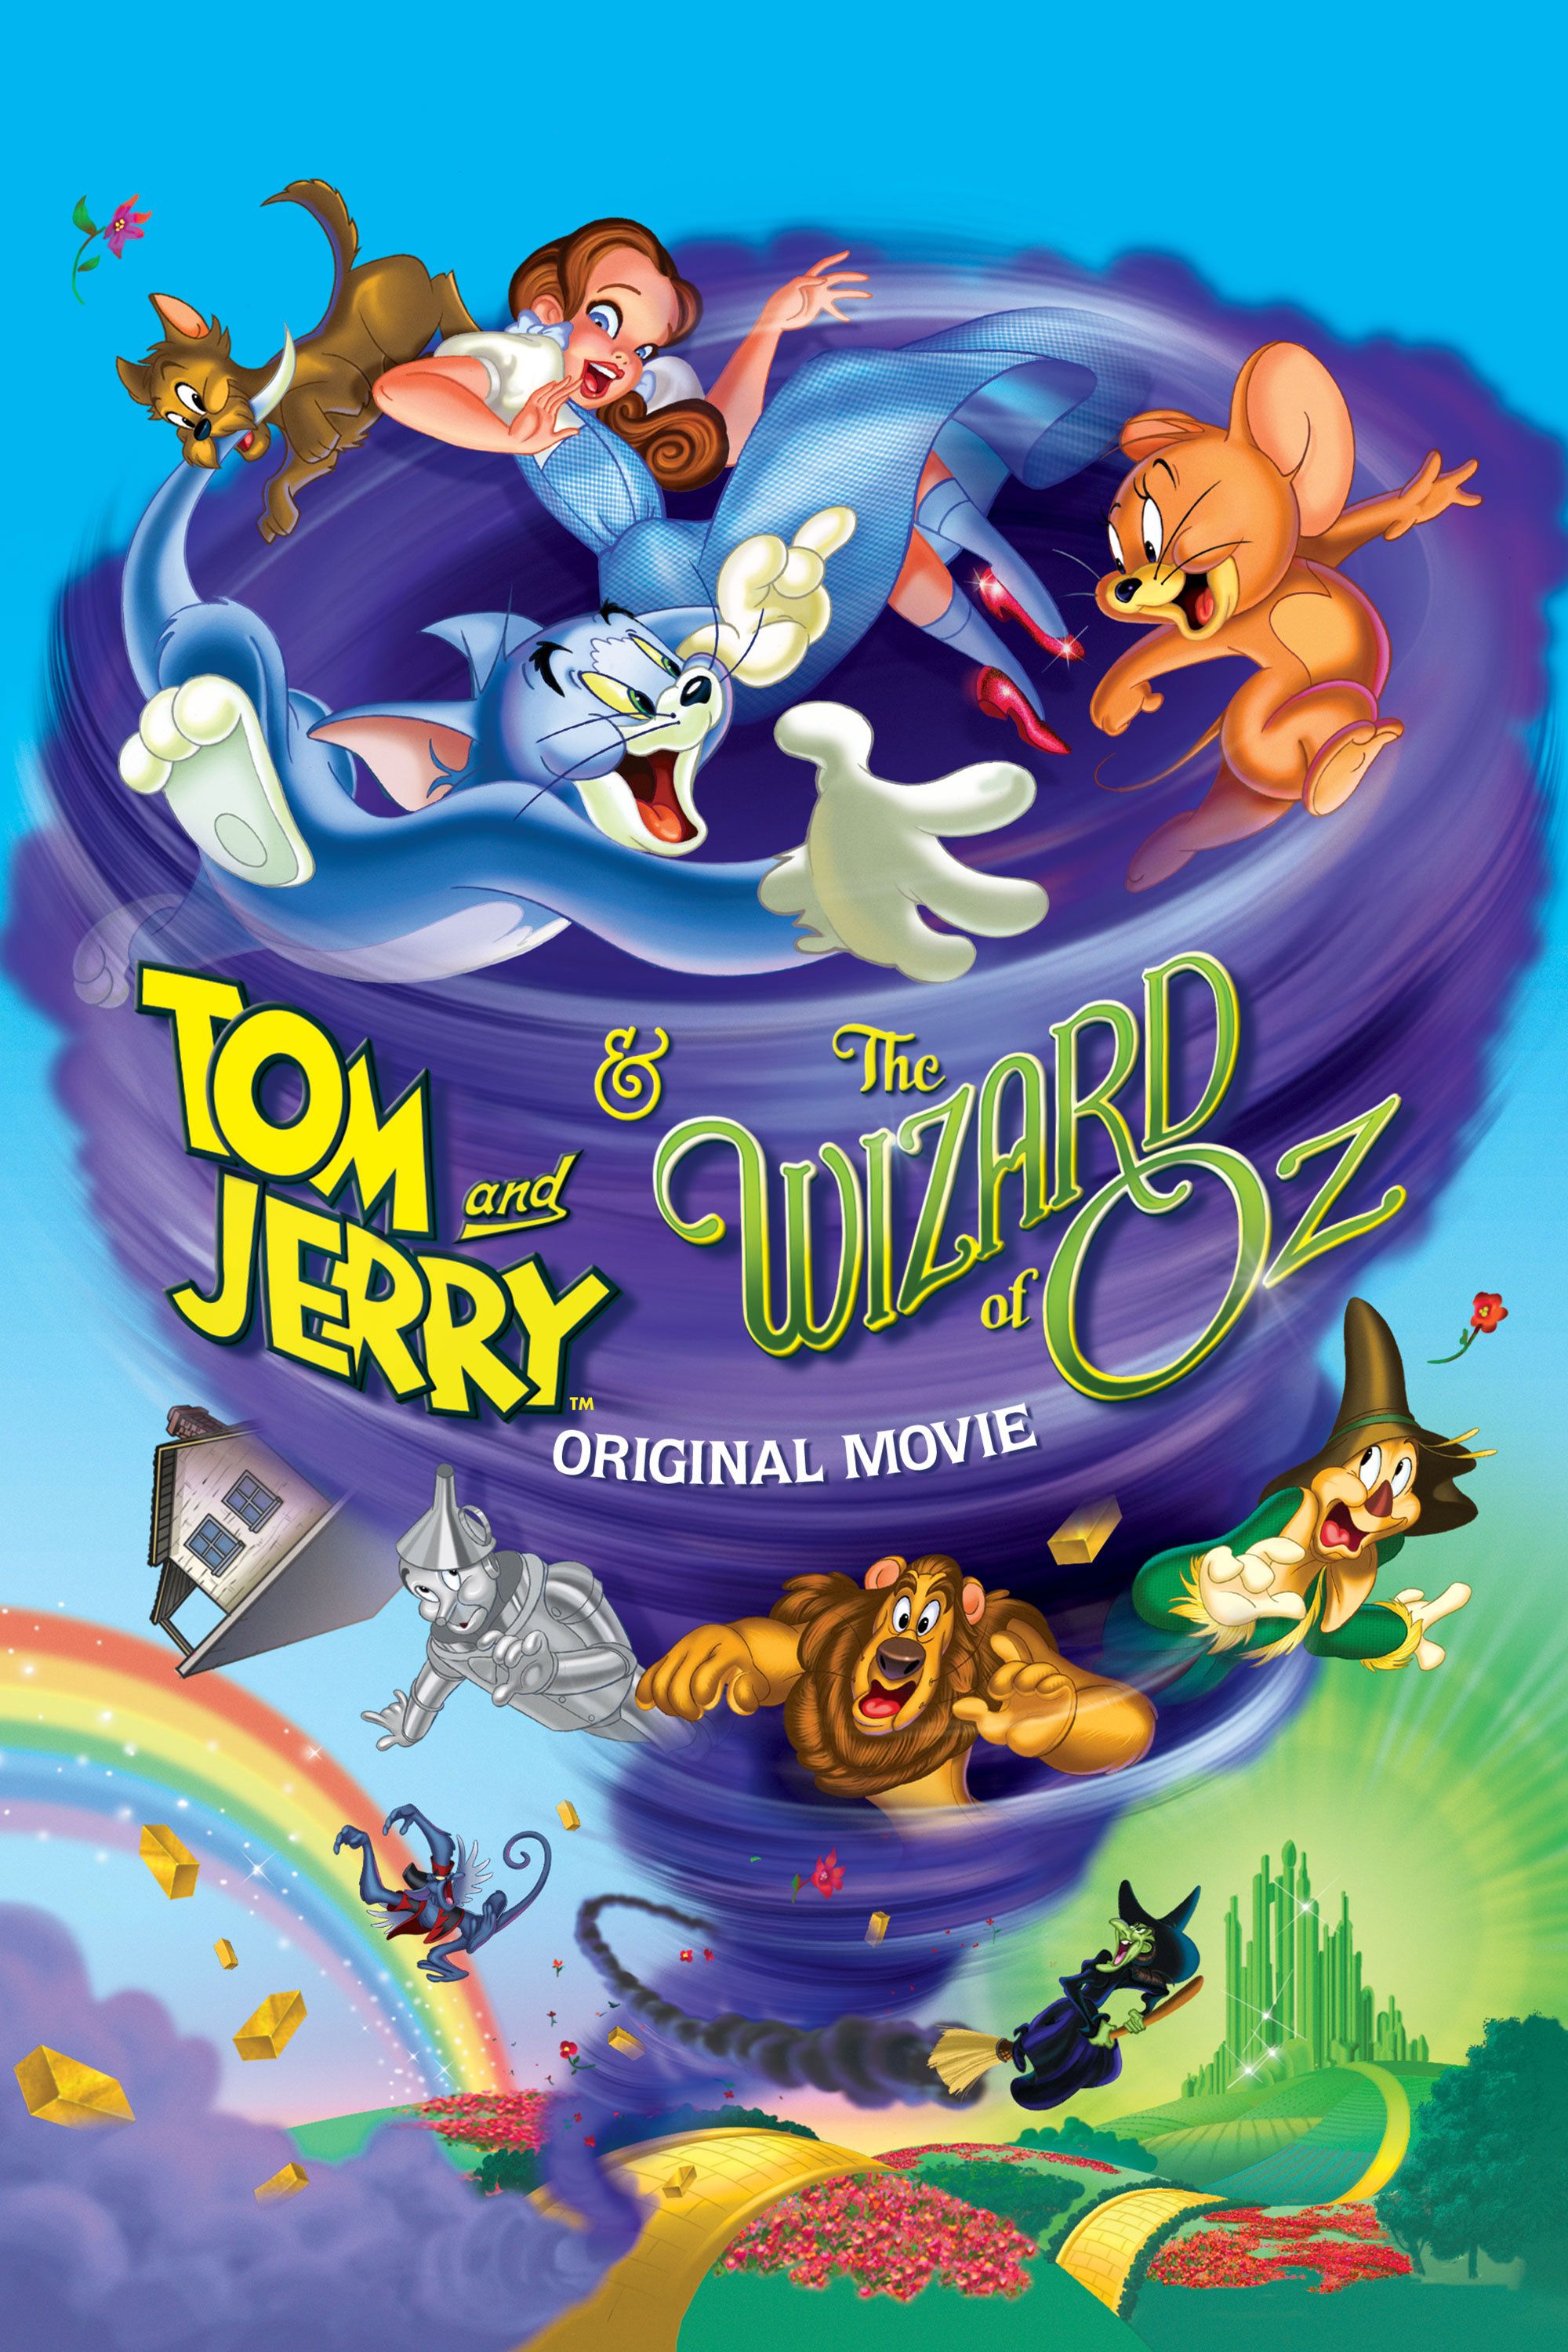 Tom and Jerry & The Wizard of Oz | Movies Anywhere